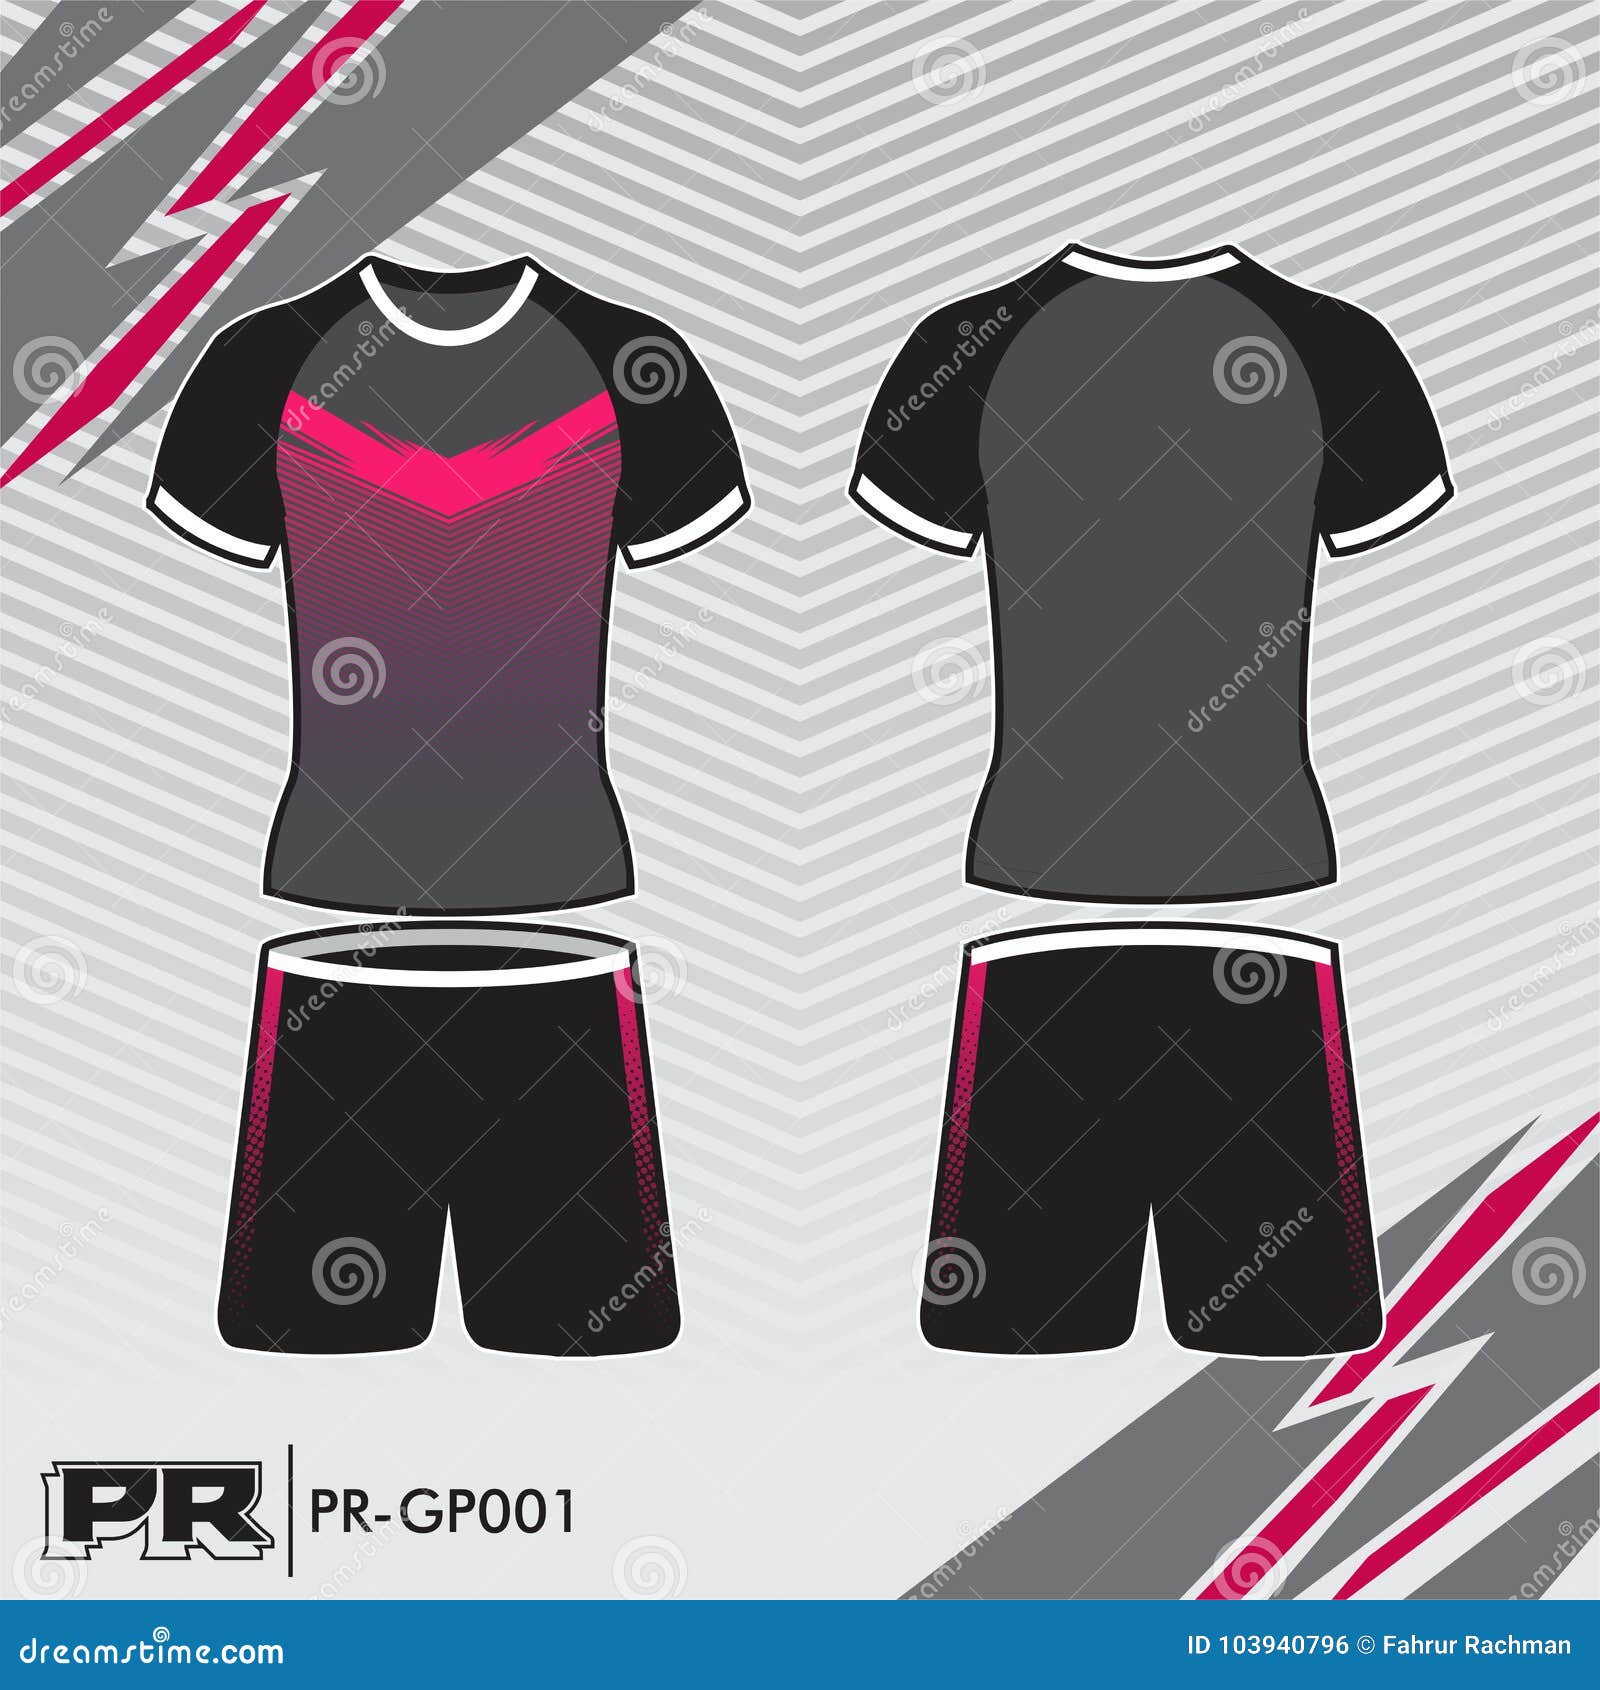 jersey design pink and gray